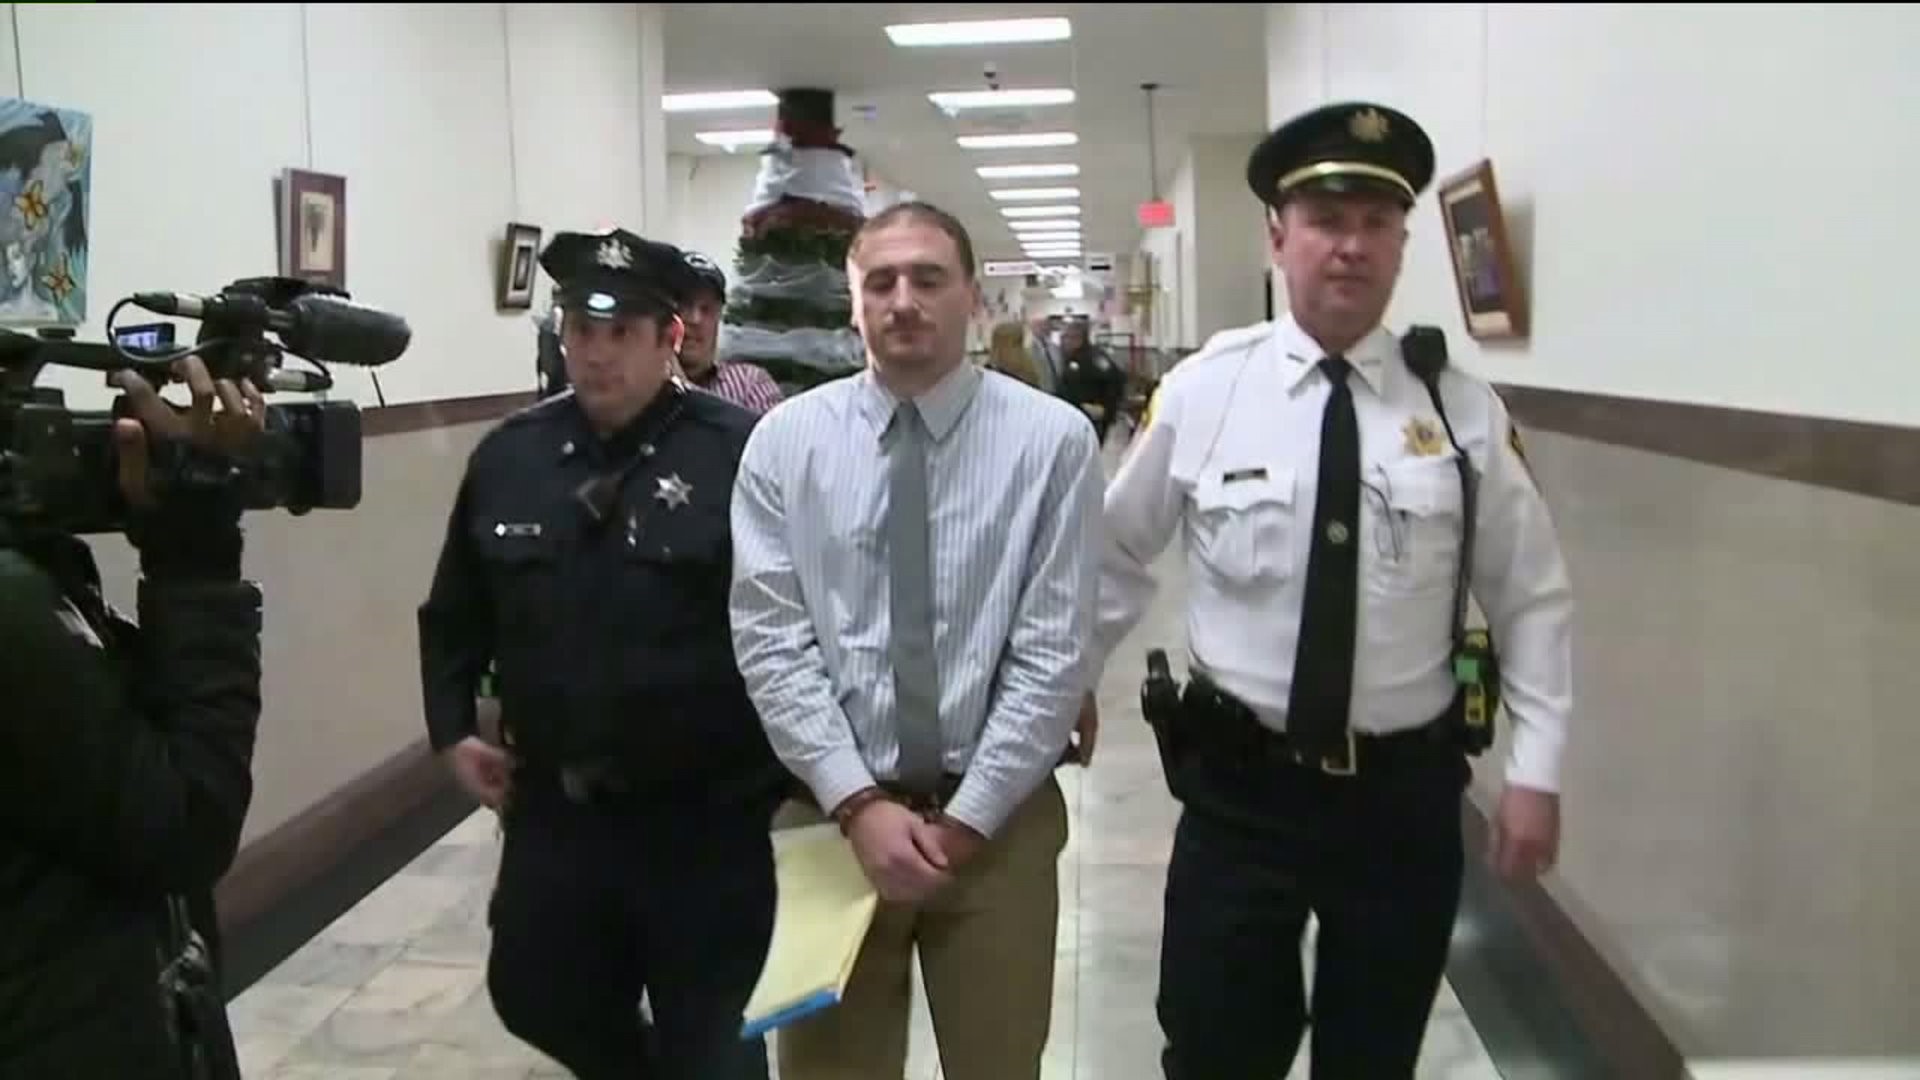 Schuylkill County Man Who Murdered Father Sent to Prison